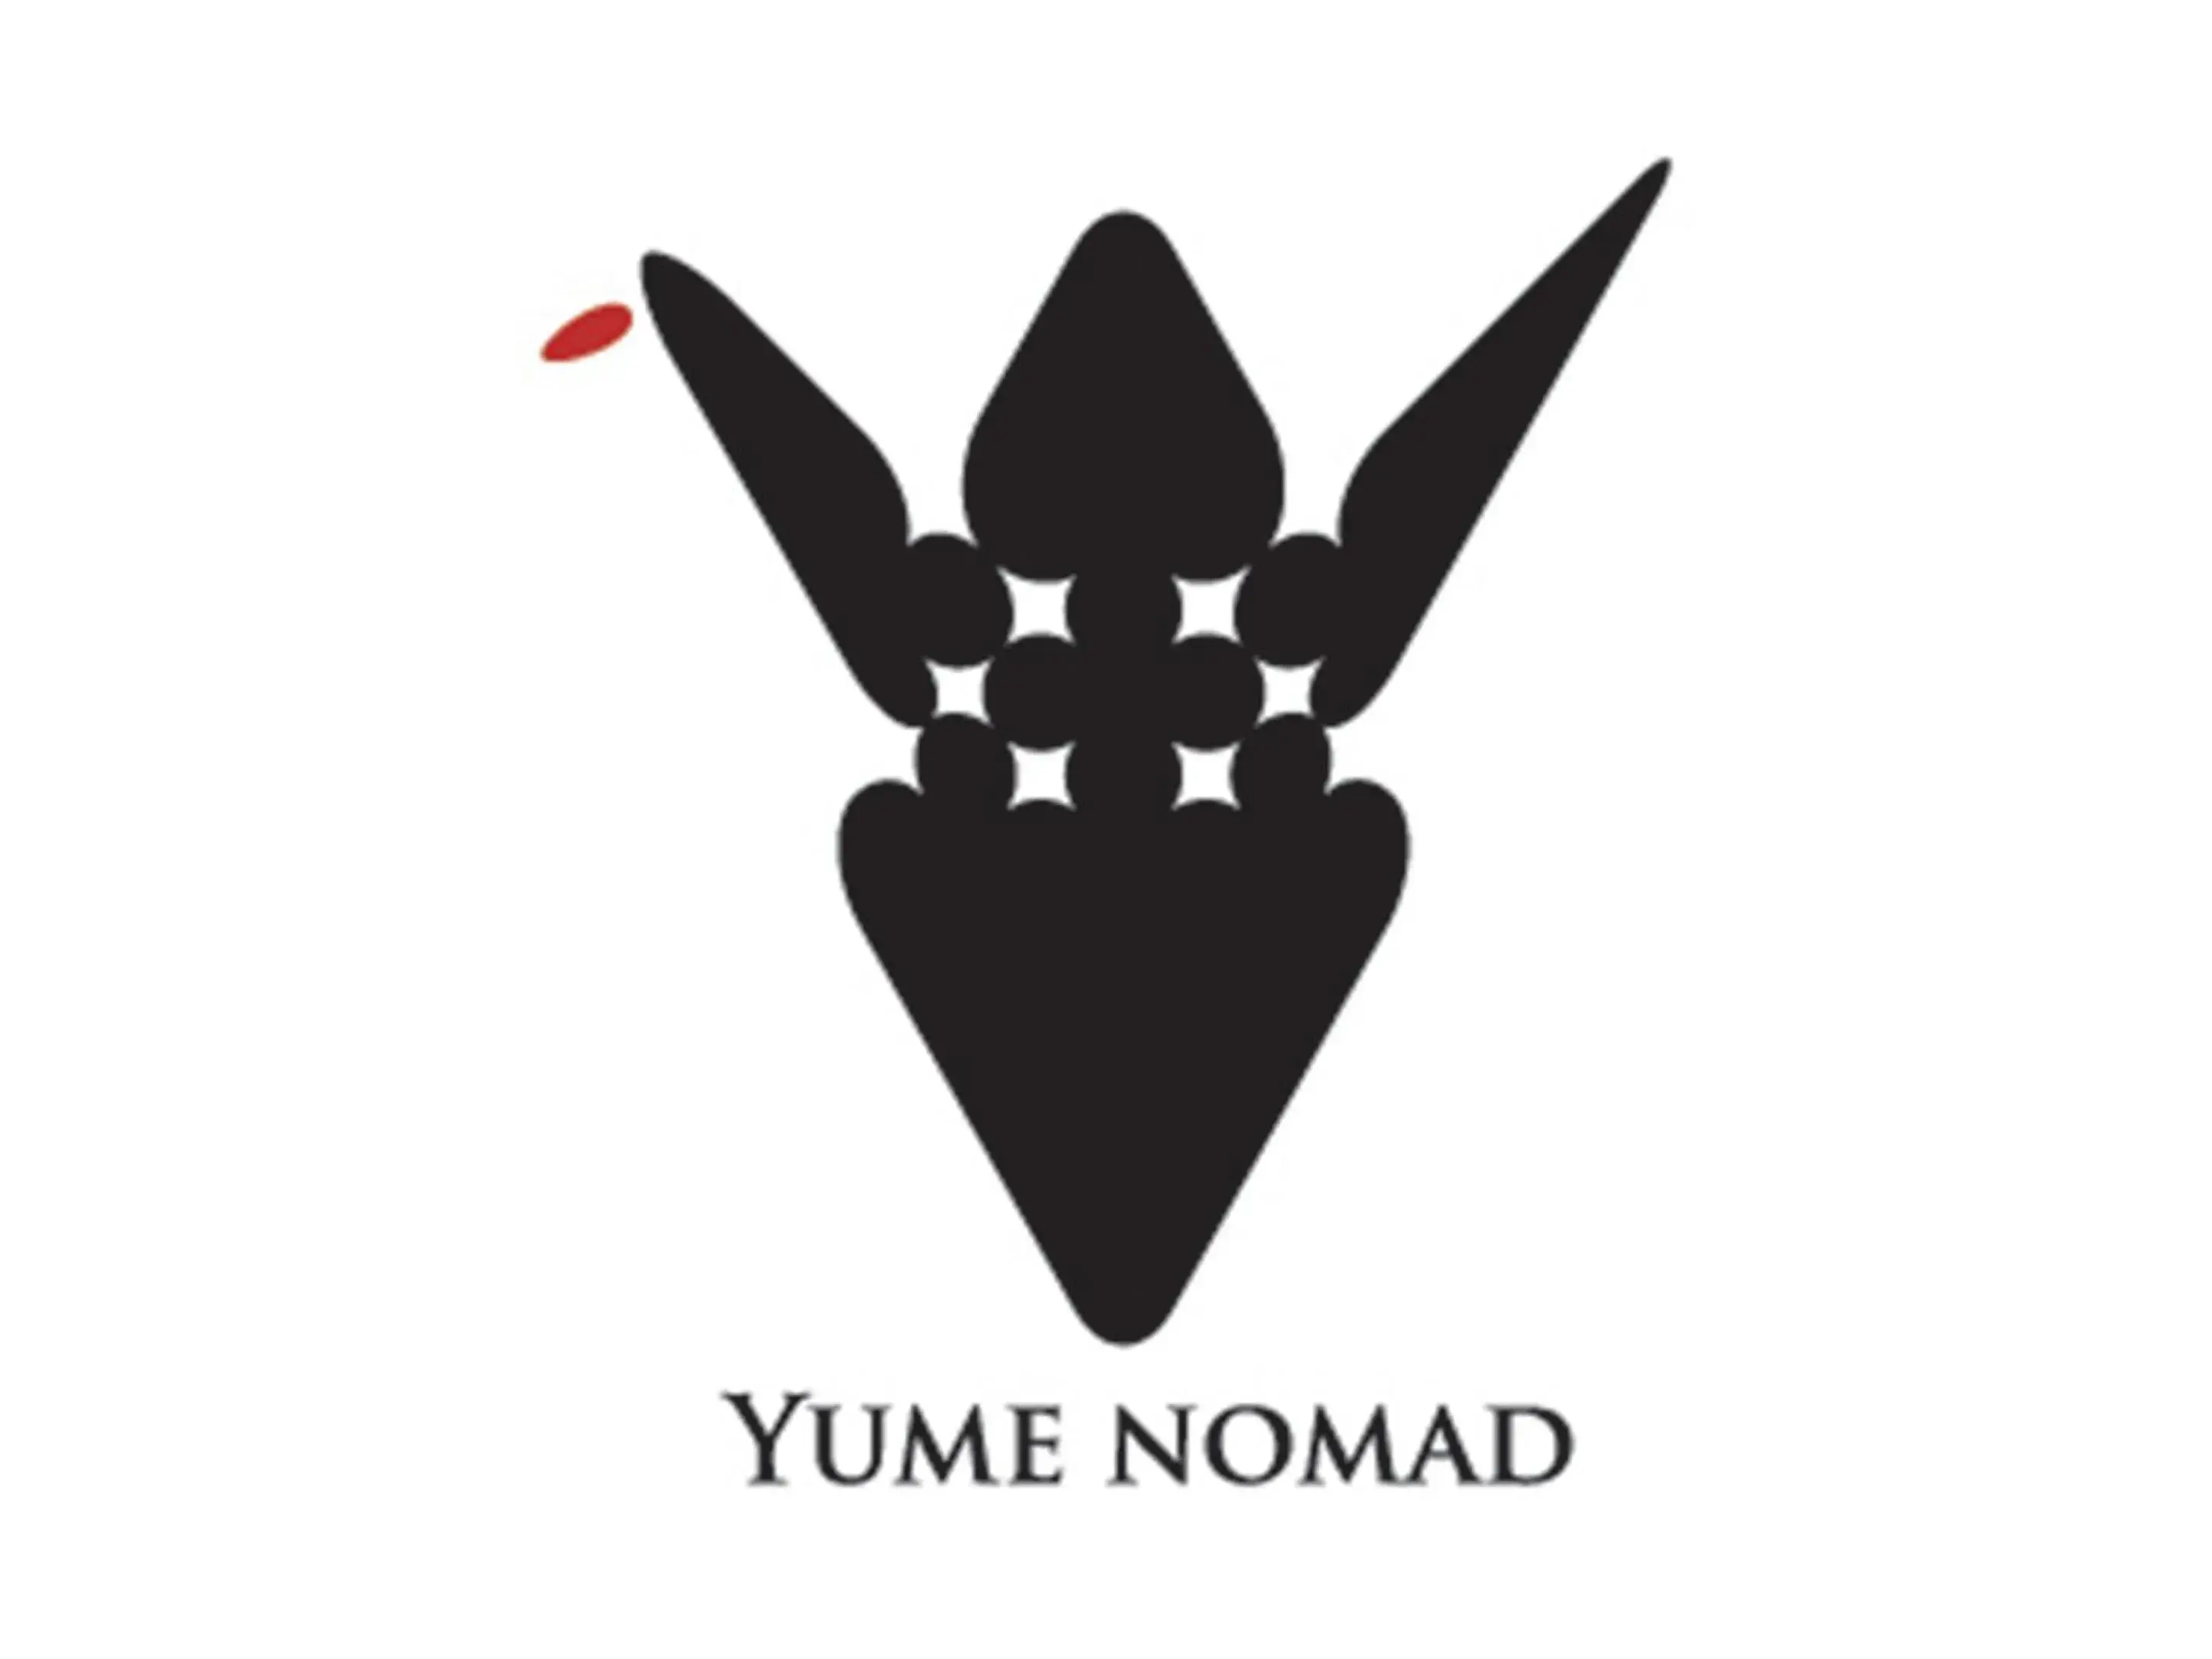 Property logo or sign in Hostel Yume Nomad